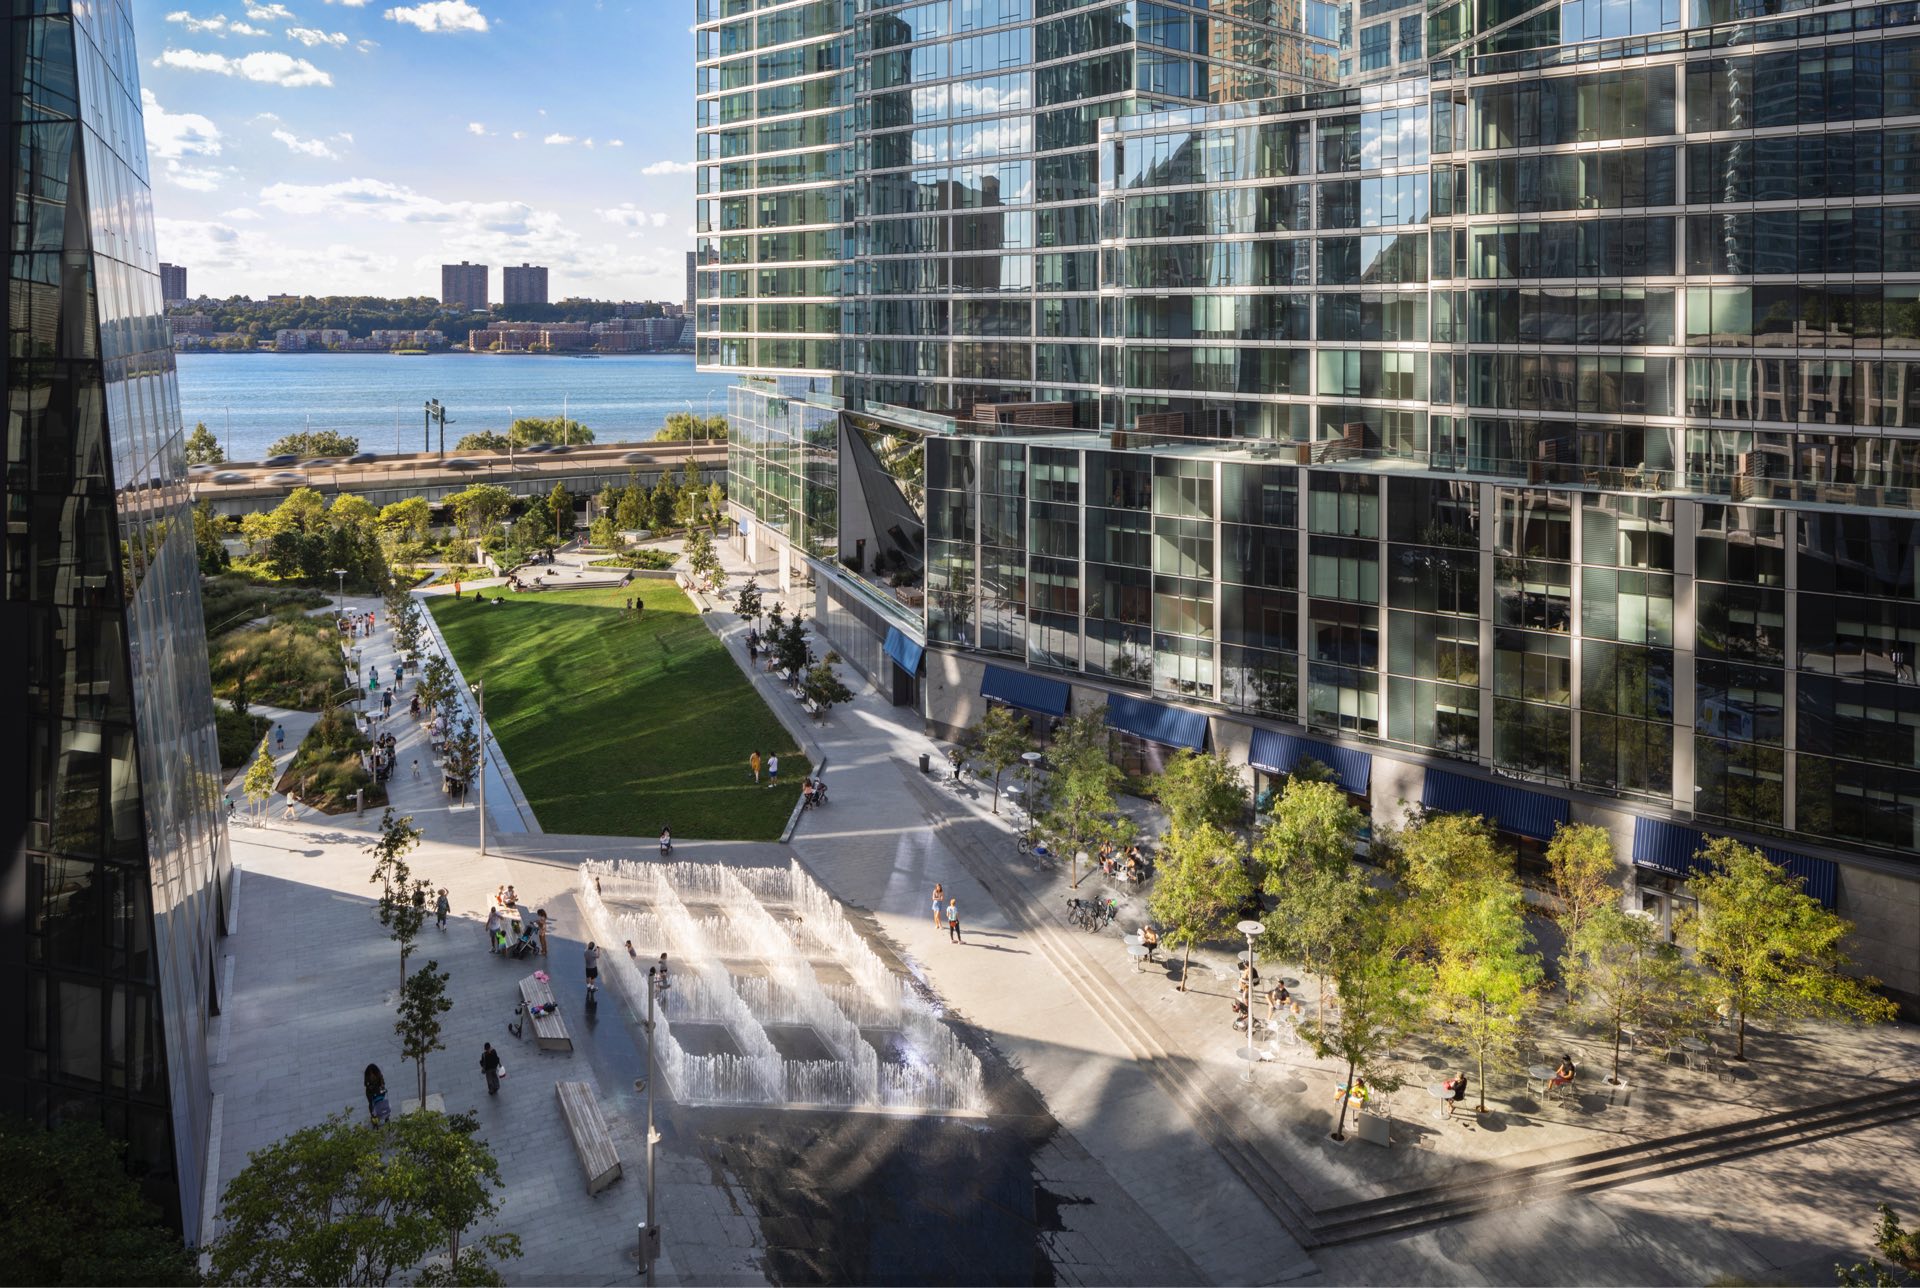 Modern urban oasis: a bustling cityscape with contemporary glass buildings framing a vibrant public space, where people enjoy the sunny outdoors against a backdrop of calming waterfront views.